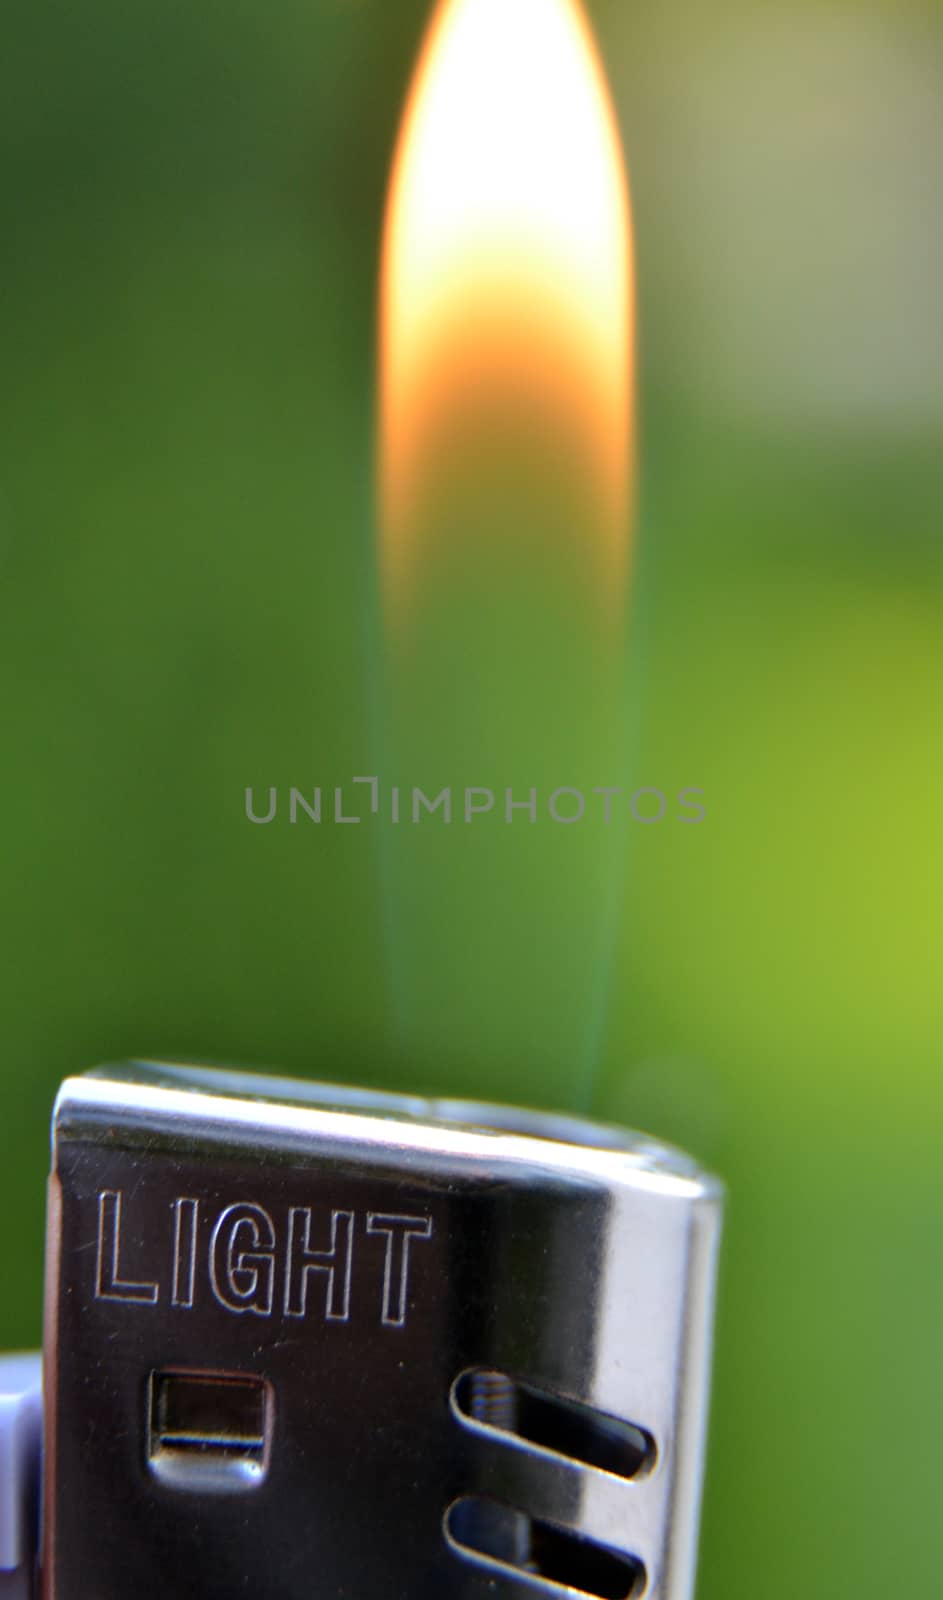 Picture of a Lighter flame, macro shot